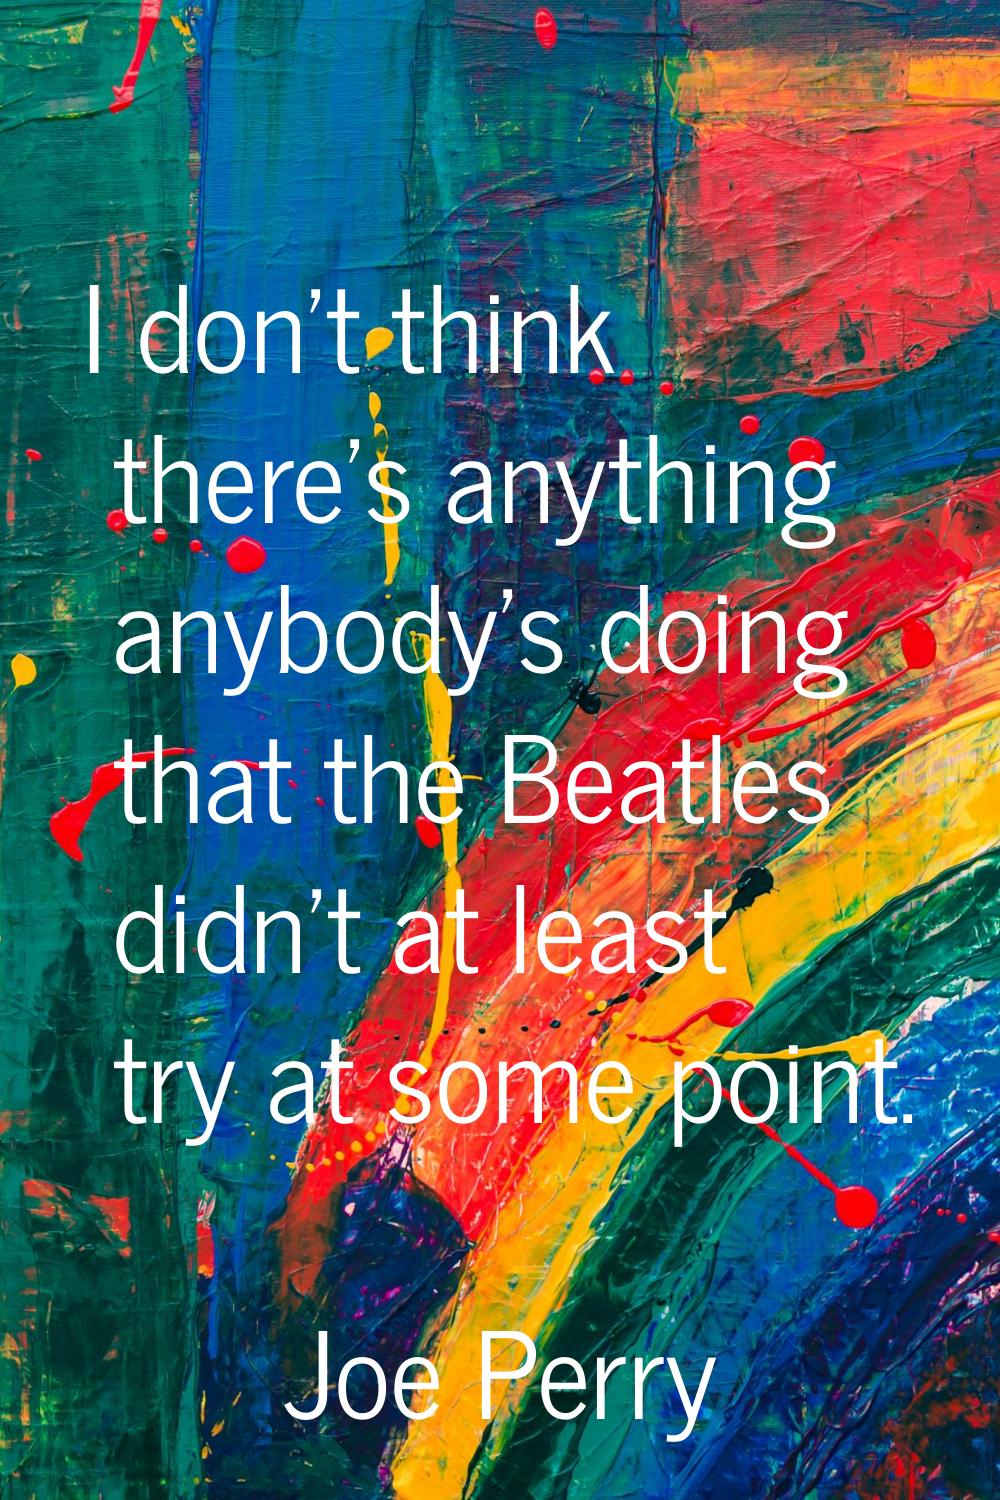 I don't think there's anything anybody's doing that the Beatles didn't at least try at some point.